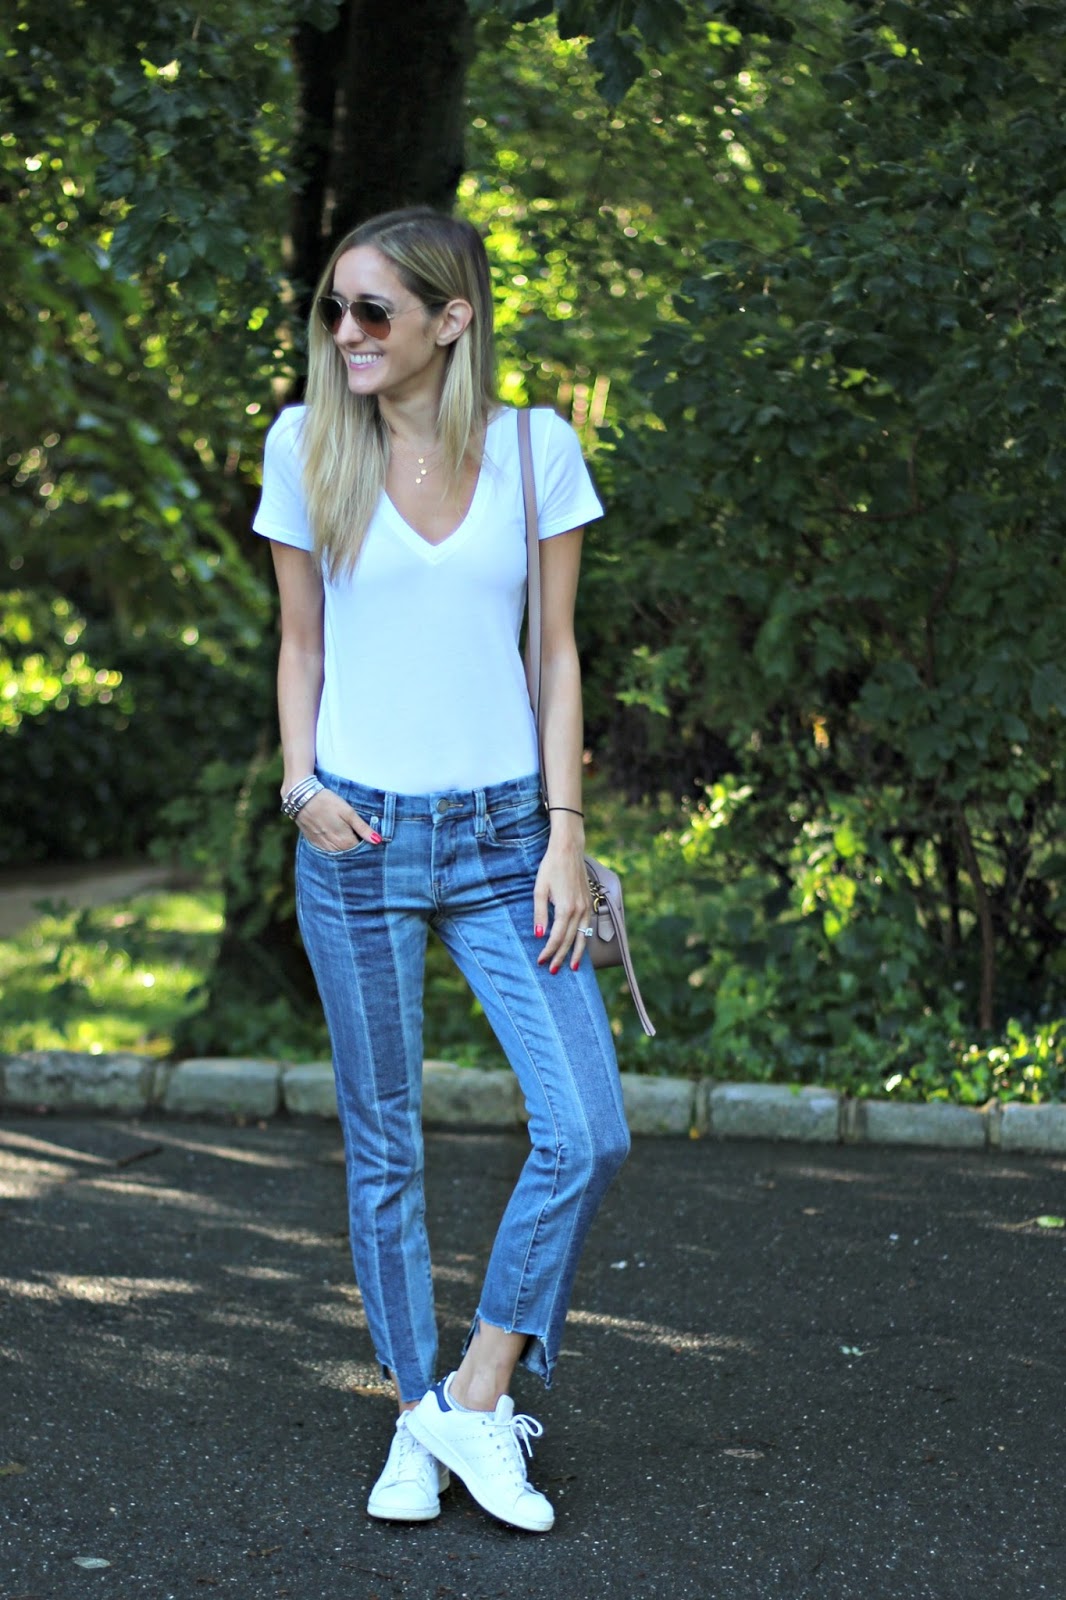 Michelle's Pa(i)ge | Fashion Blogger based in New York: FALL DENIM TRENDS